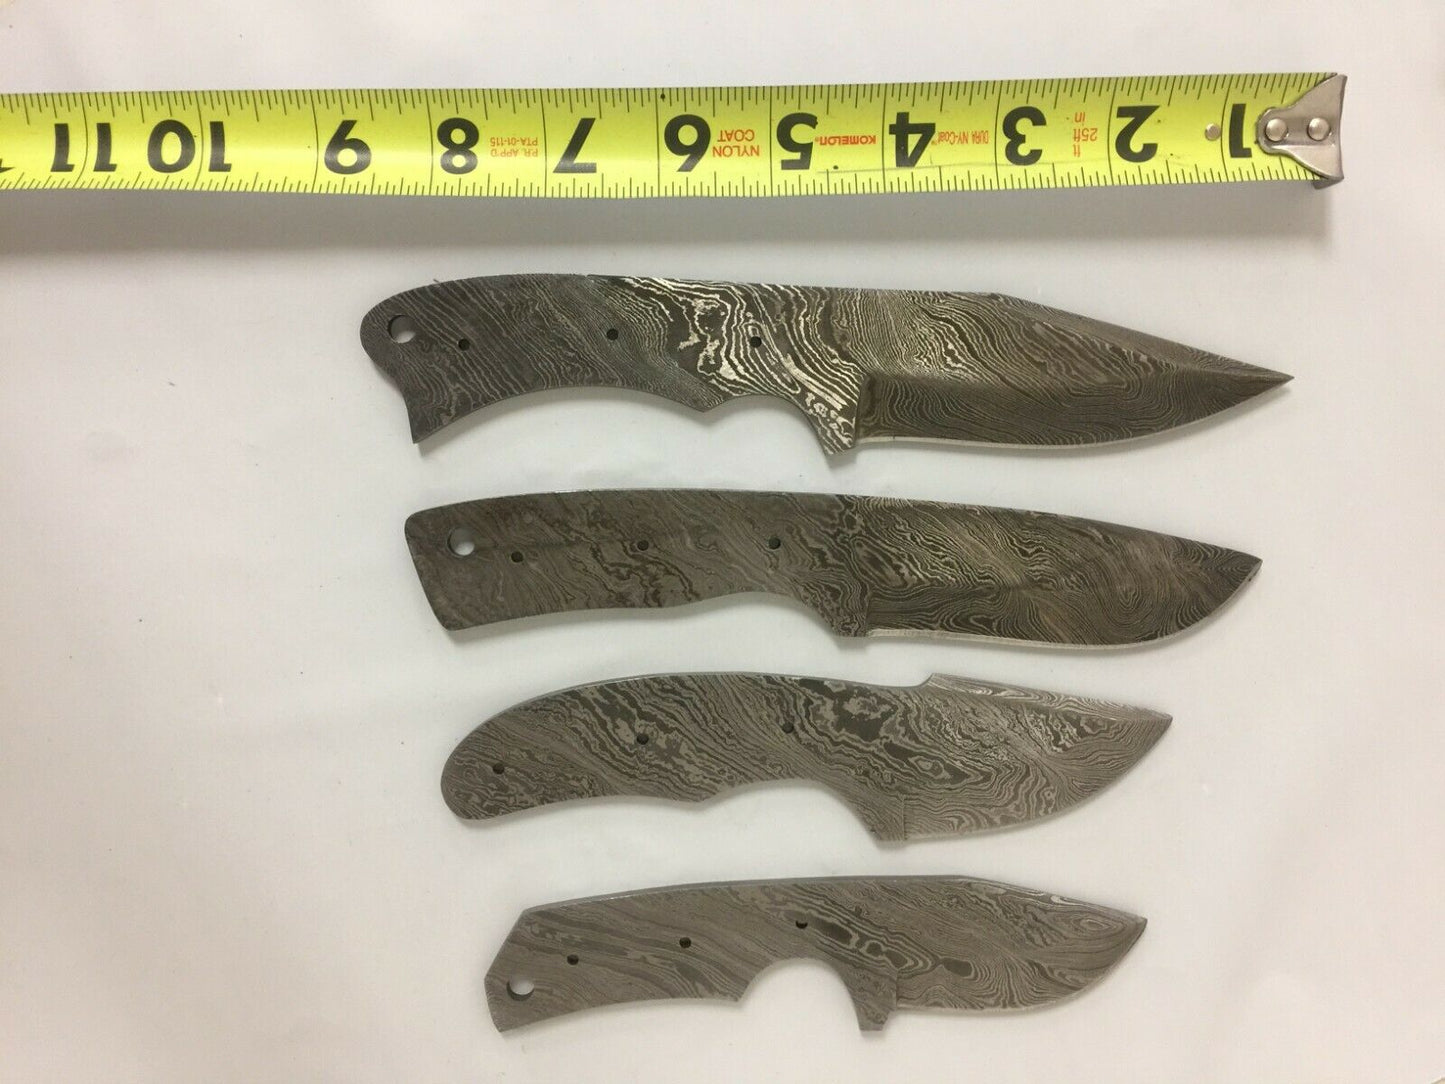 4 pieces blank blade set, over 32" long hand forged Damascus steel knives